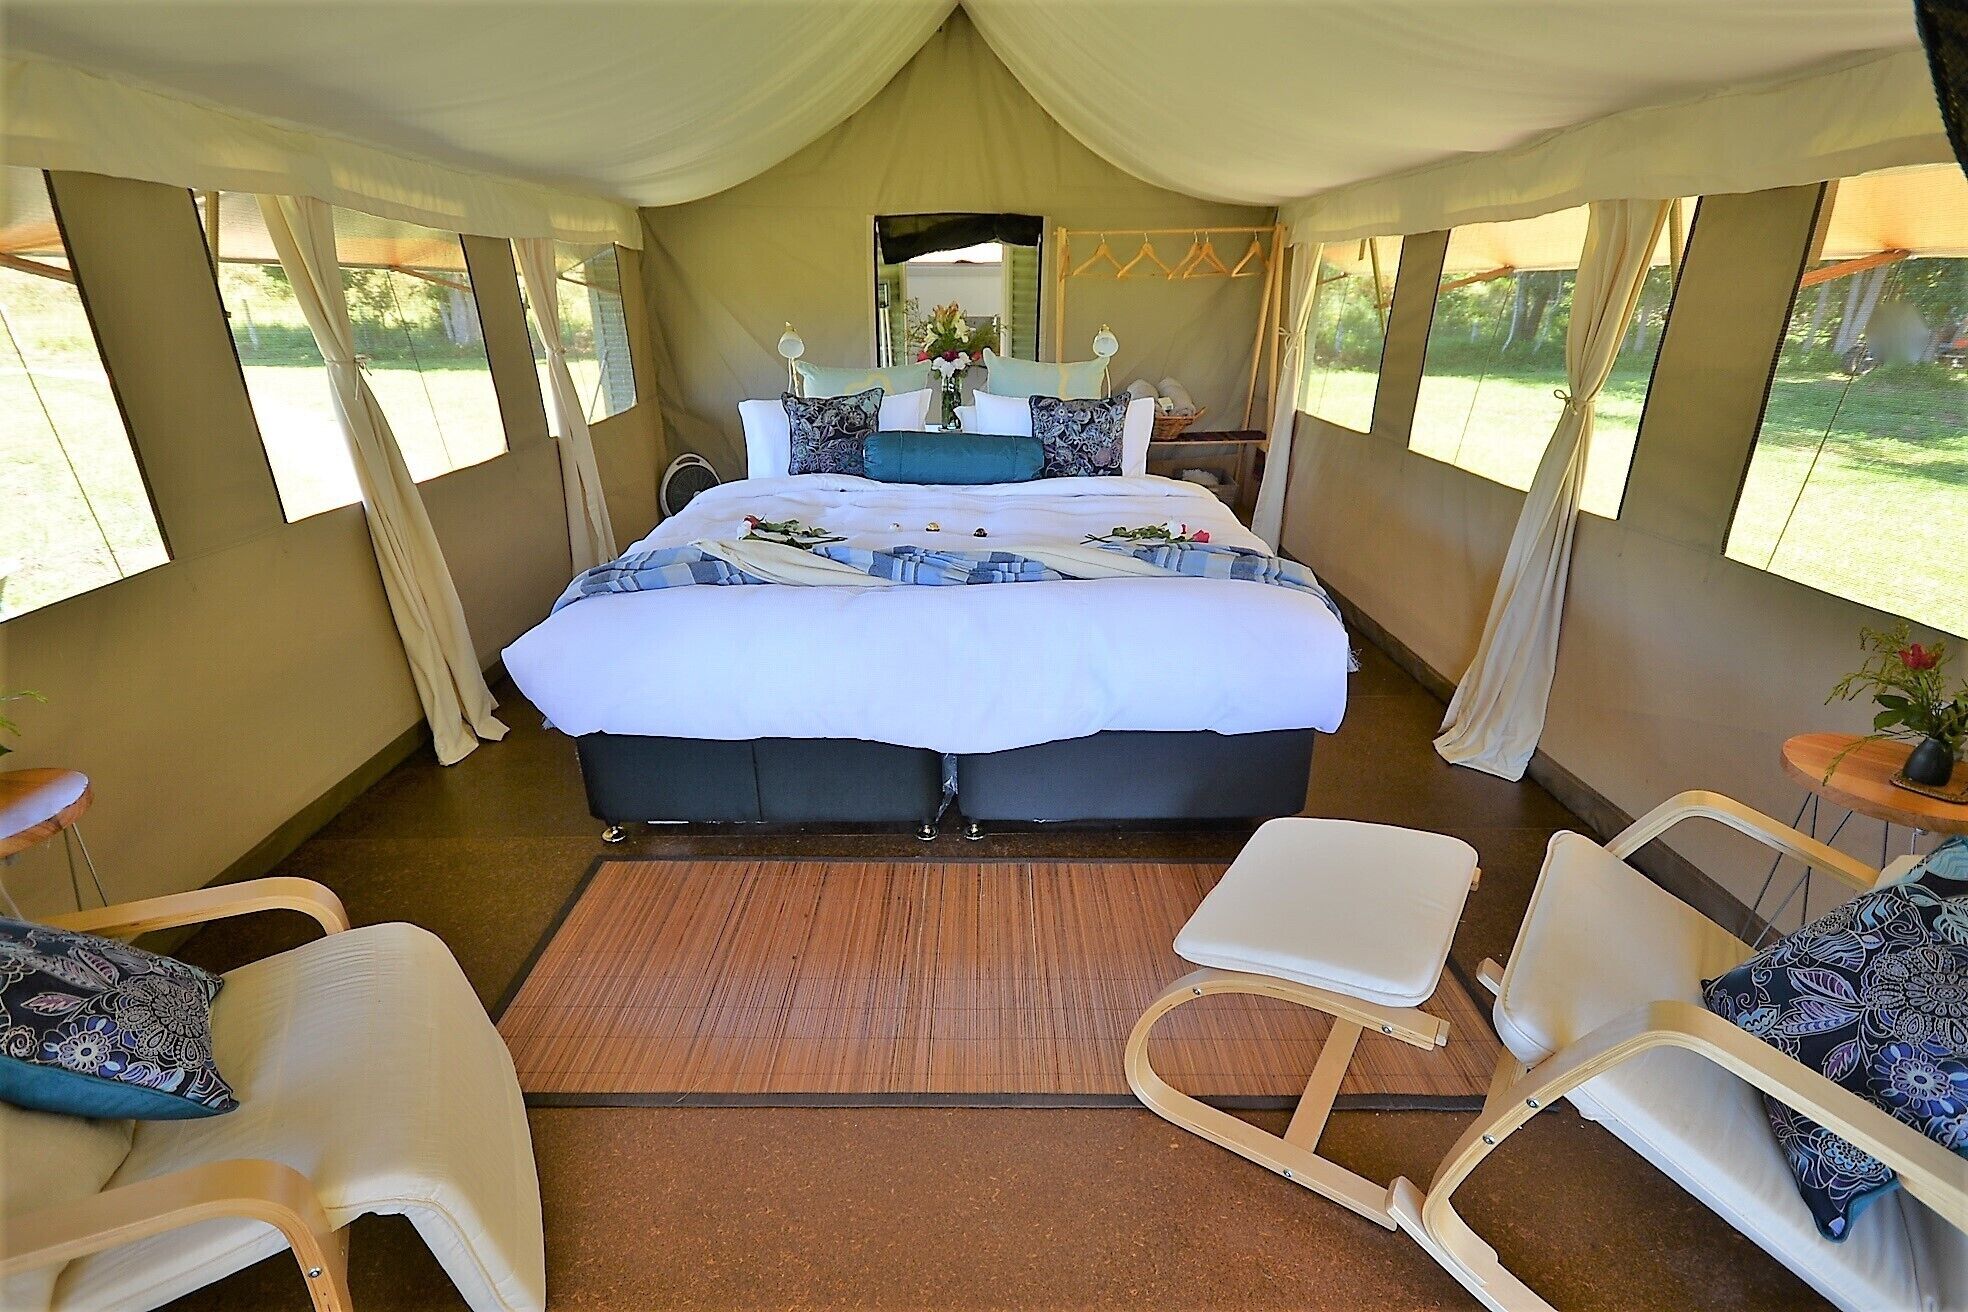 Glamping@byron Luxury Tent #1 - Minutes to Byron With Easy Access